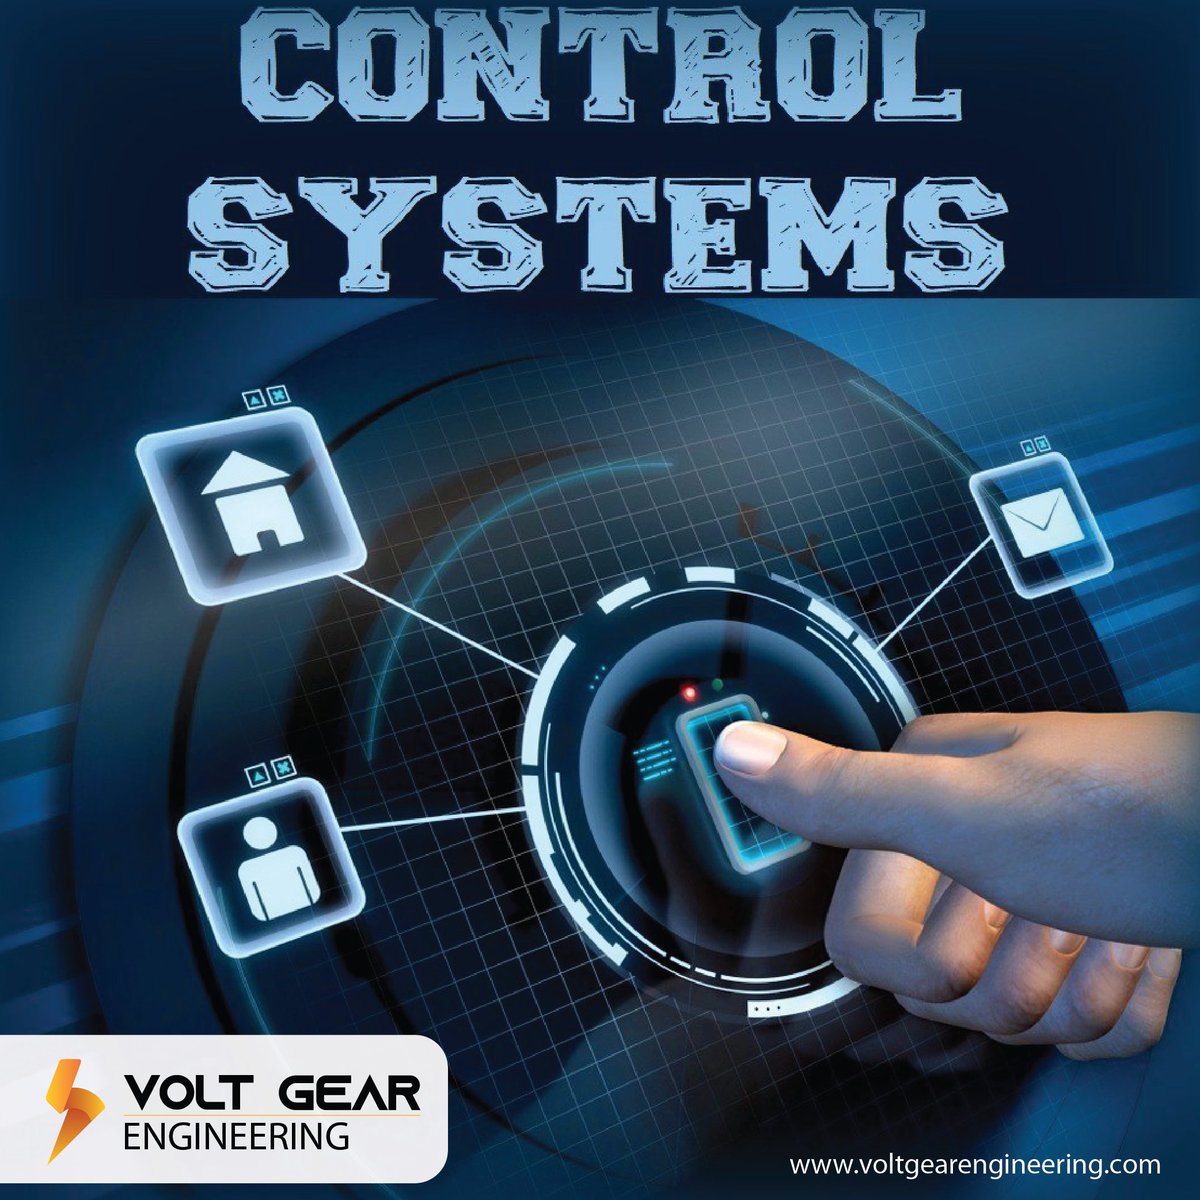 Maximize your operations with our custom control systems expertise. Experience the power of automation and real-time monitoring for increased efficiency.
.
.
#controlsystems #voltgearengineering #Automation